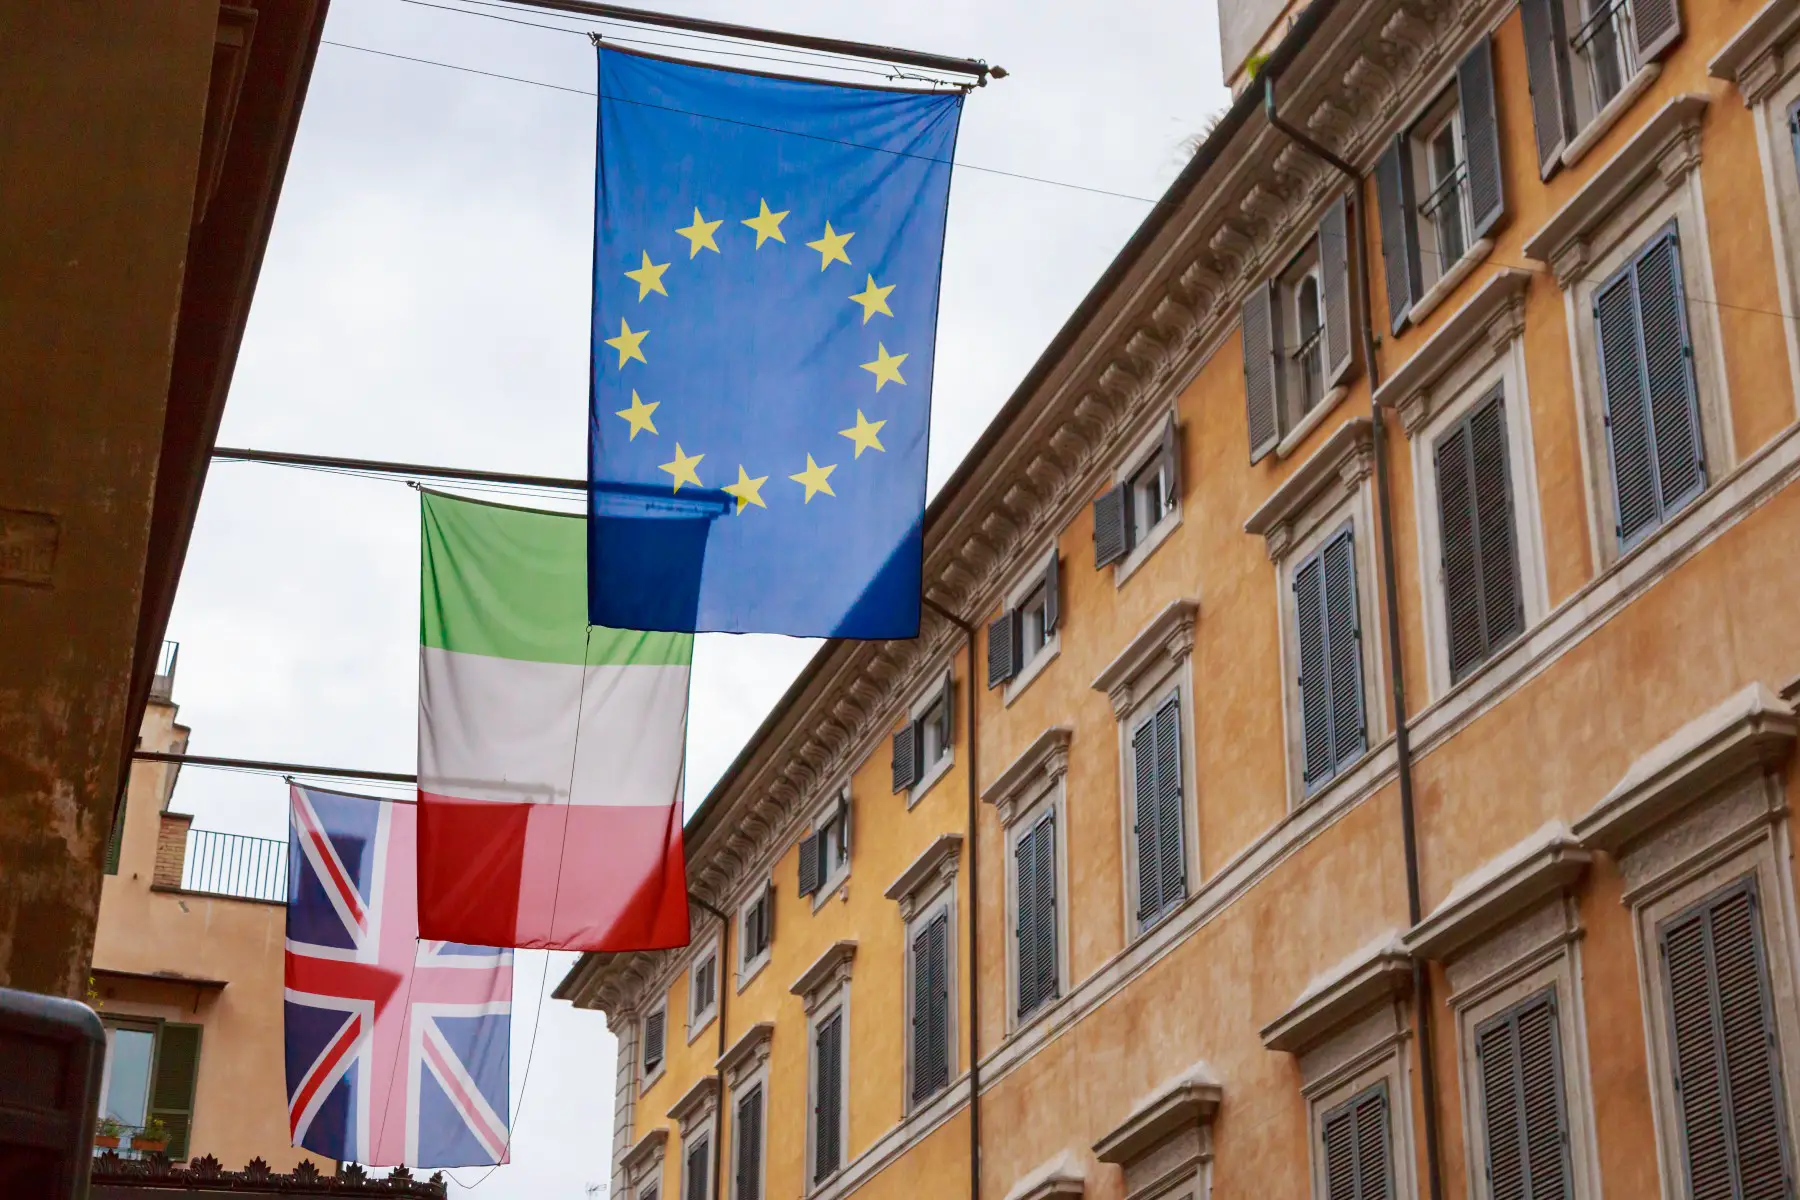 Flags of the UK, Italy, and Europe hanging outside a building in Rome, Italy.